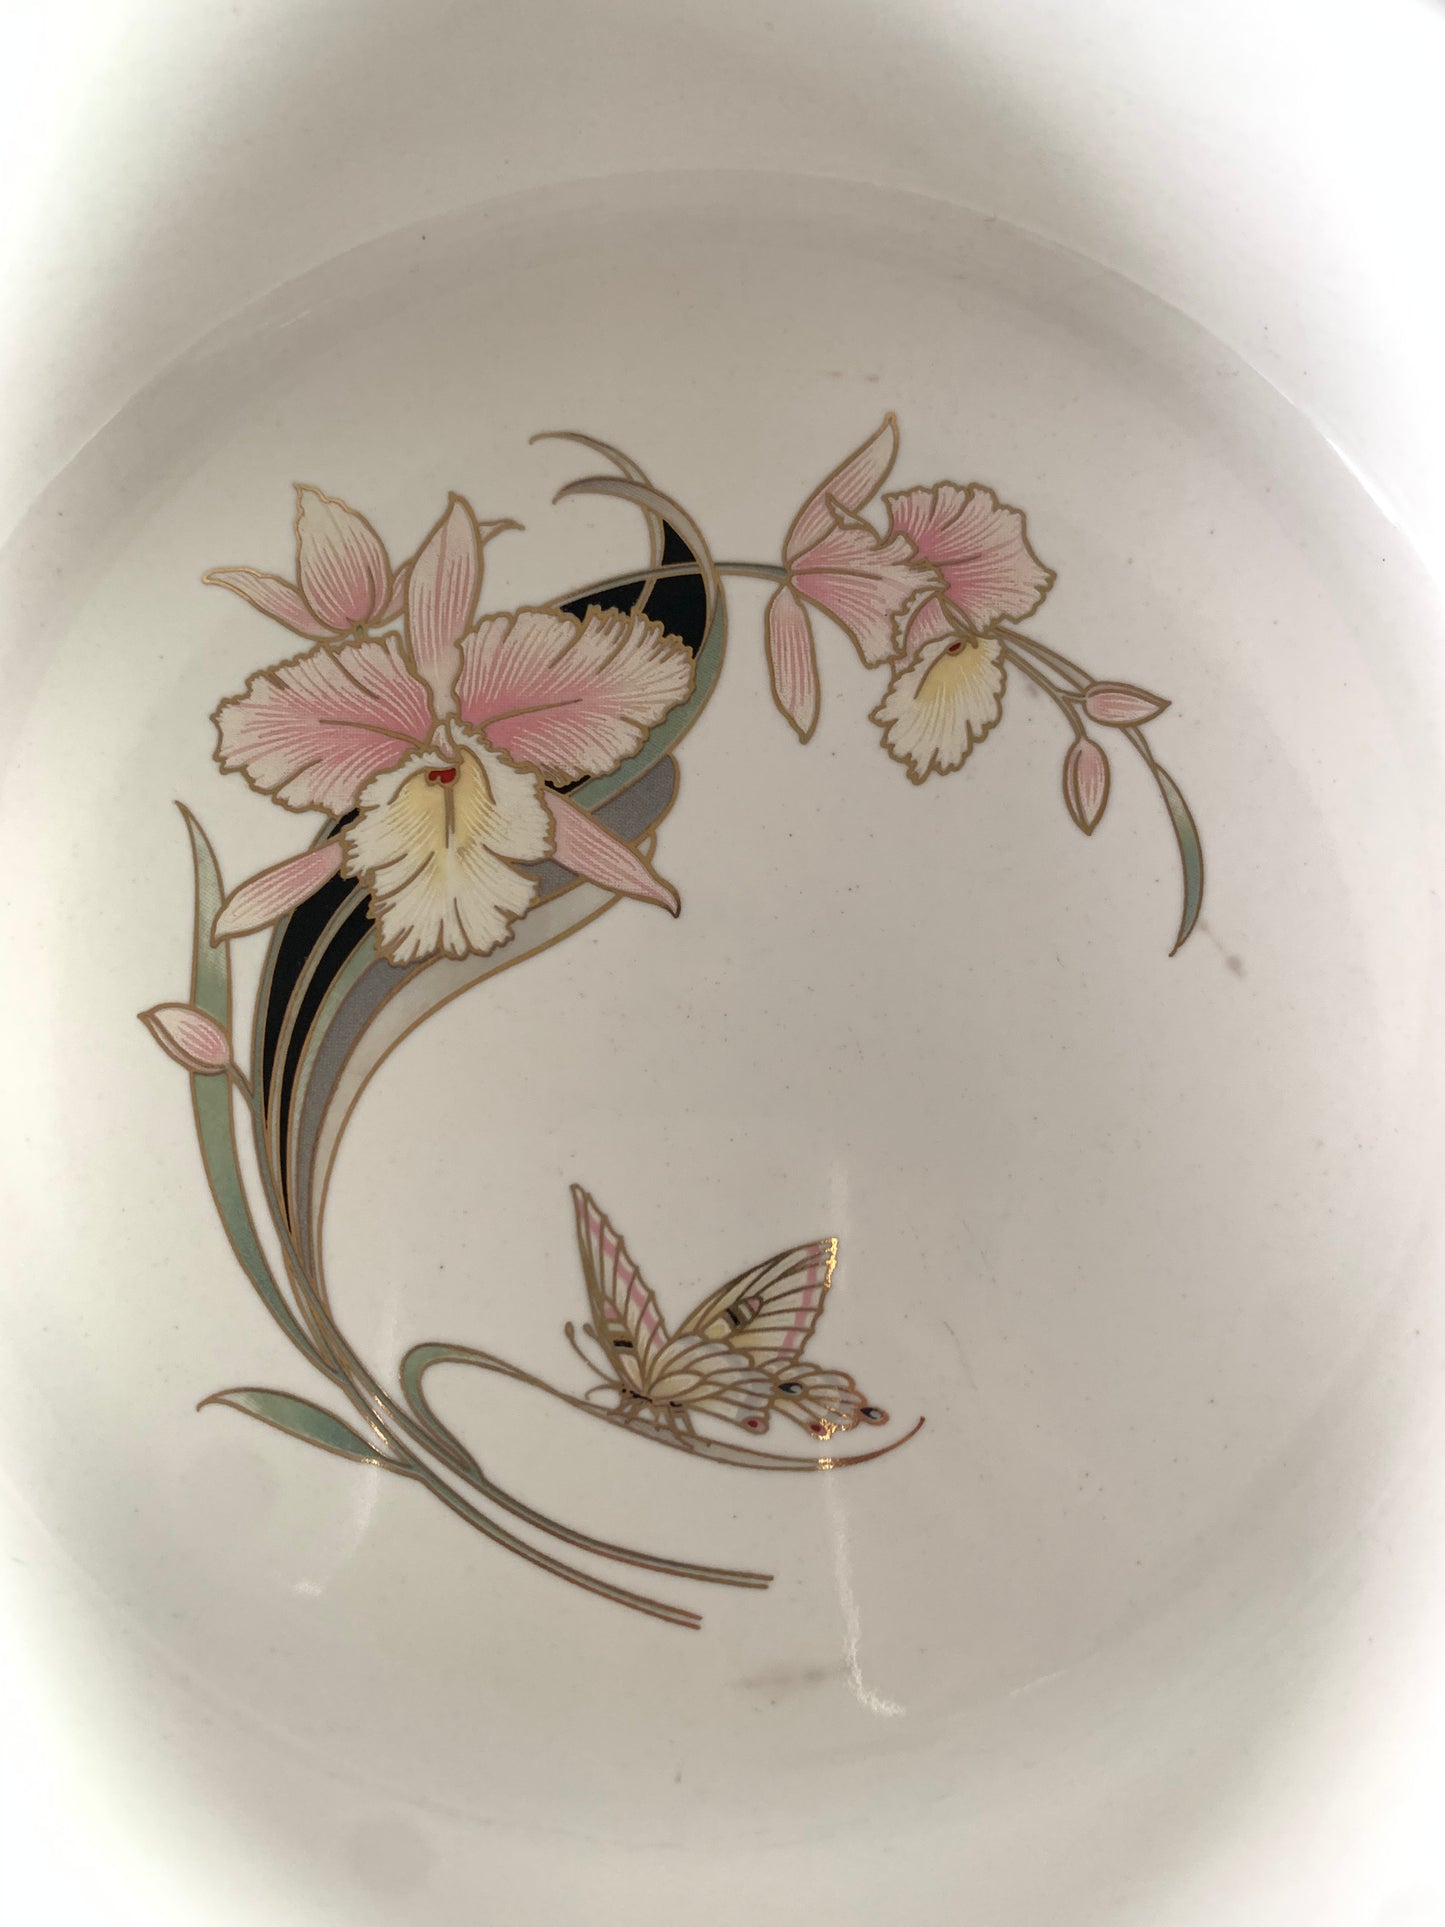 1980s Vintage Japanese Flower Etched Tray With Gold Accents